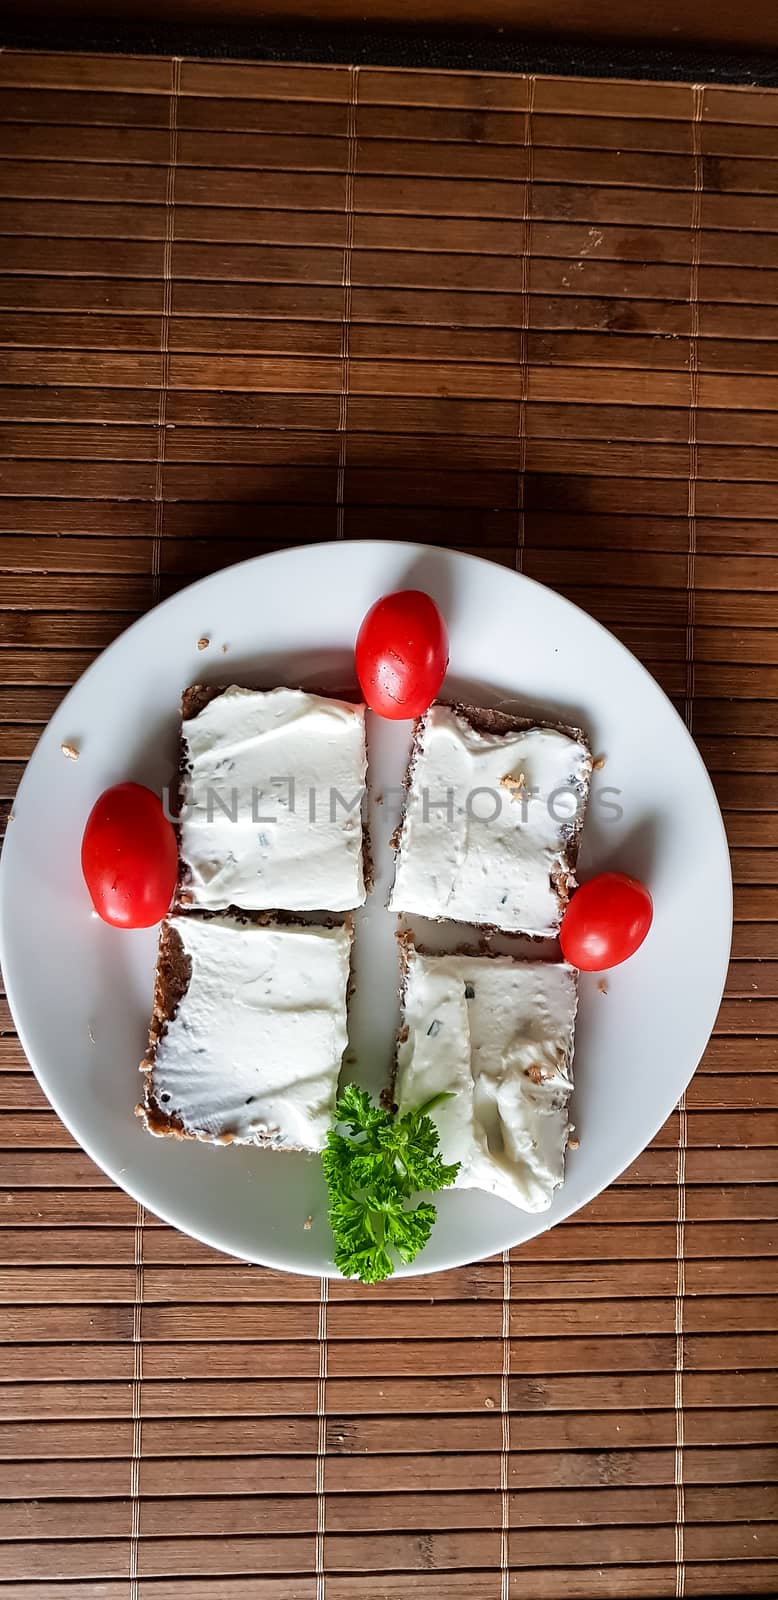 Homemade wholemeal brown bread with cottage cheese and parsley on brown bamboo base.